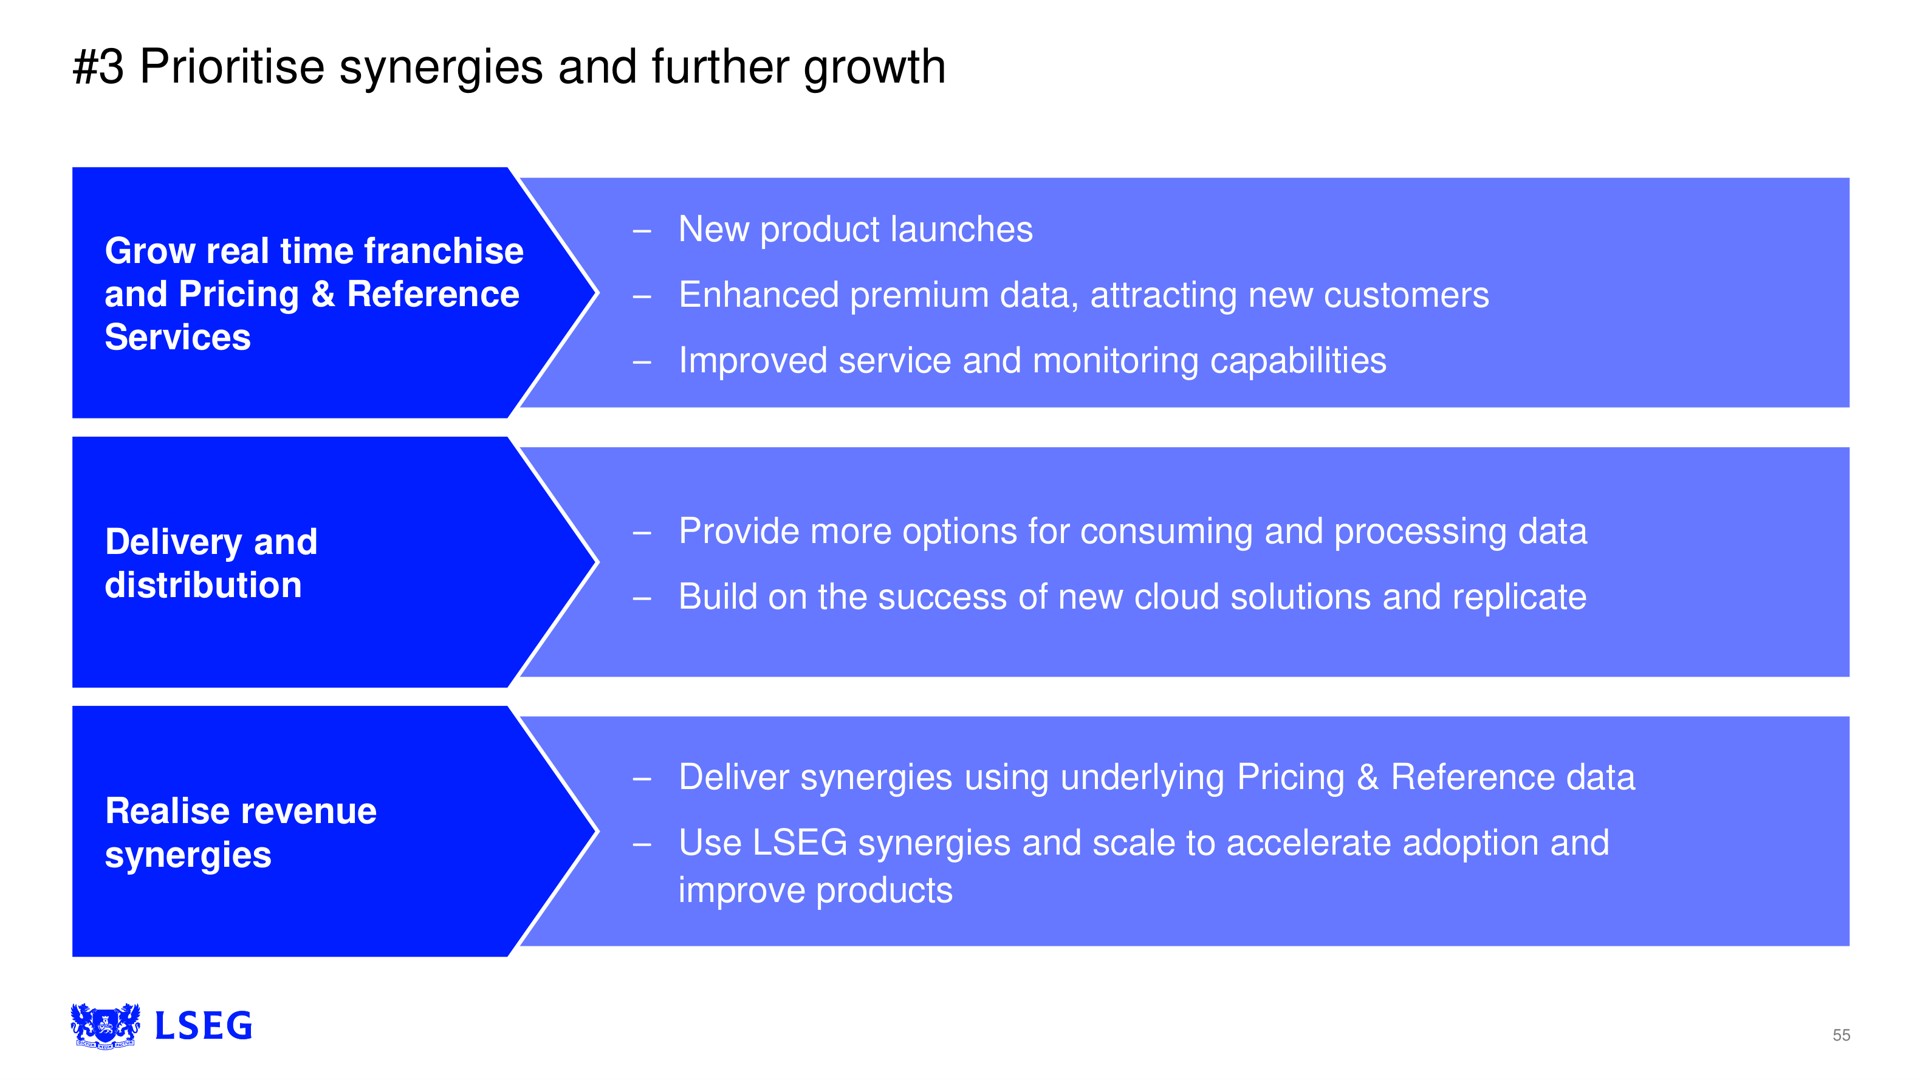 synergies and further growth | LSE